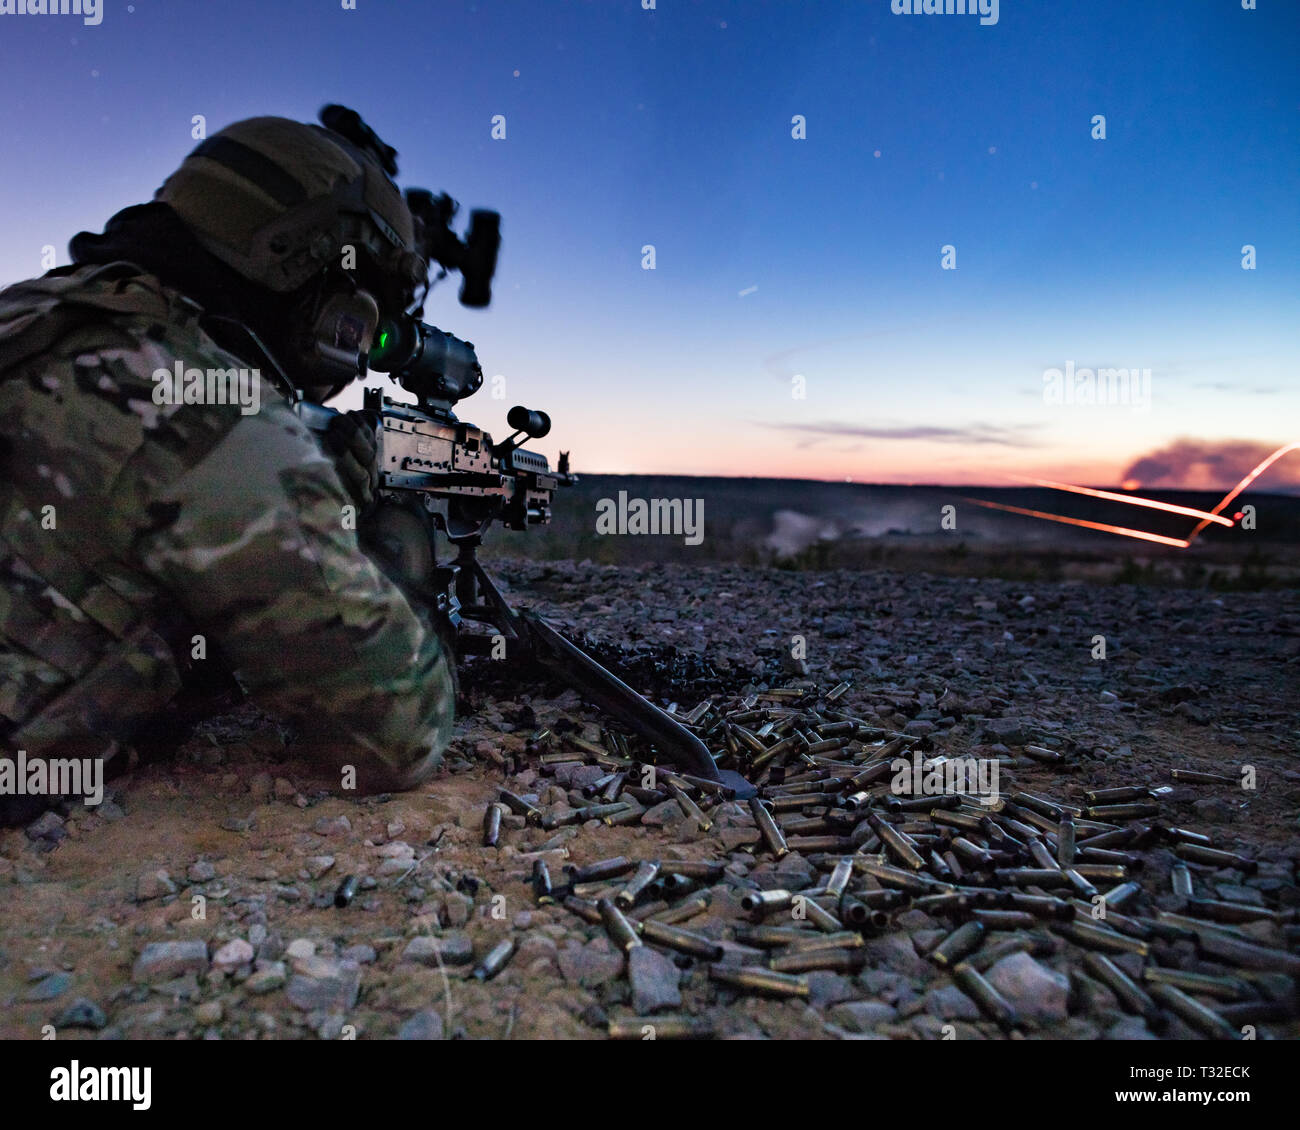 A Green Beret assigned to 3rd Special Forces Group (Airborne) fires the M240B machine gun, April 2, 2019 at Fort Bragg, NC. Green Berets fired multiple weapon systems during the live fire range to include the M2 .50 caliber machine gun, M320 grenade launcher and the M249 Squad Automatic Weapon. (U.S. Army photo by Sgt. Steven Lewis) Stock Photo